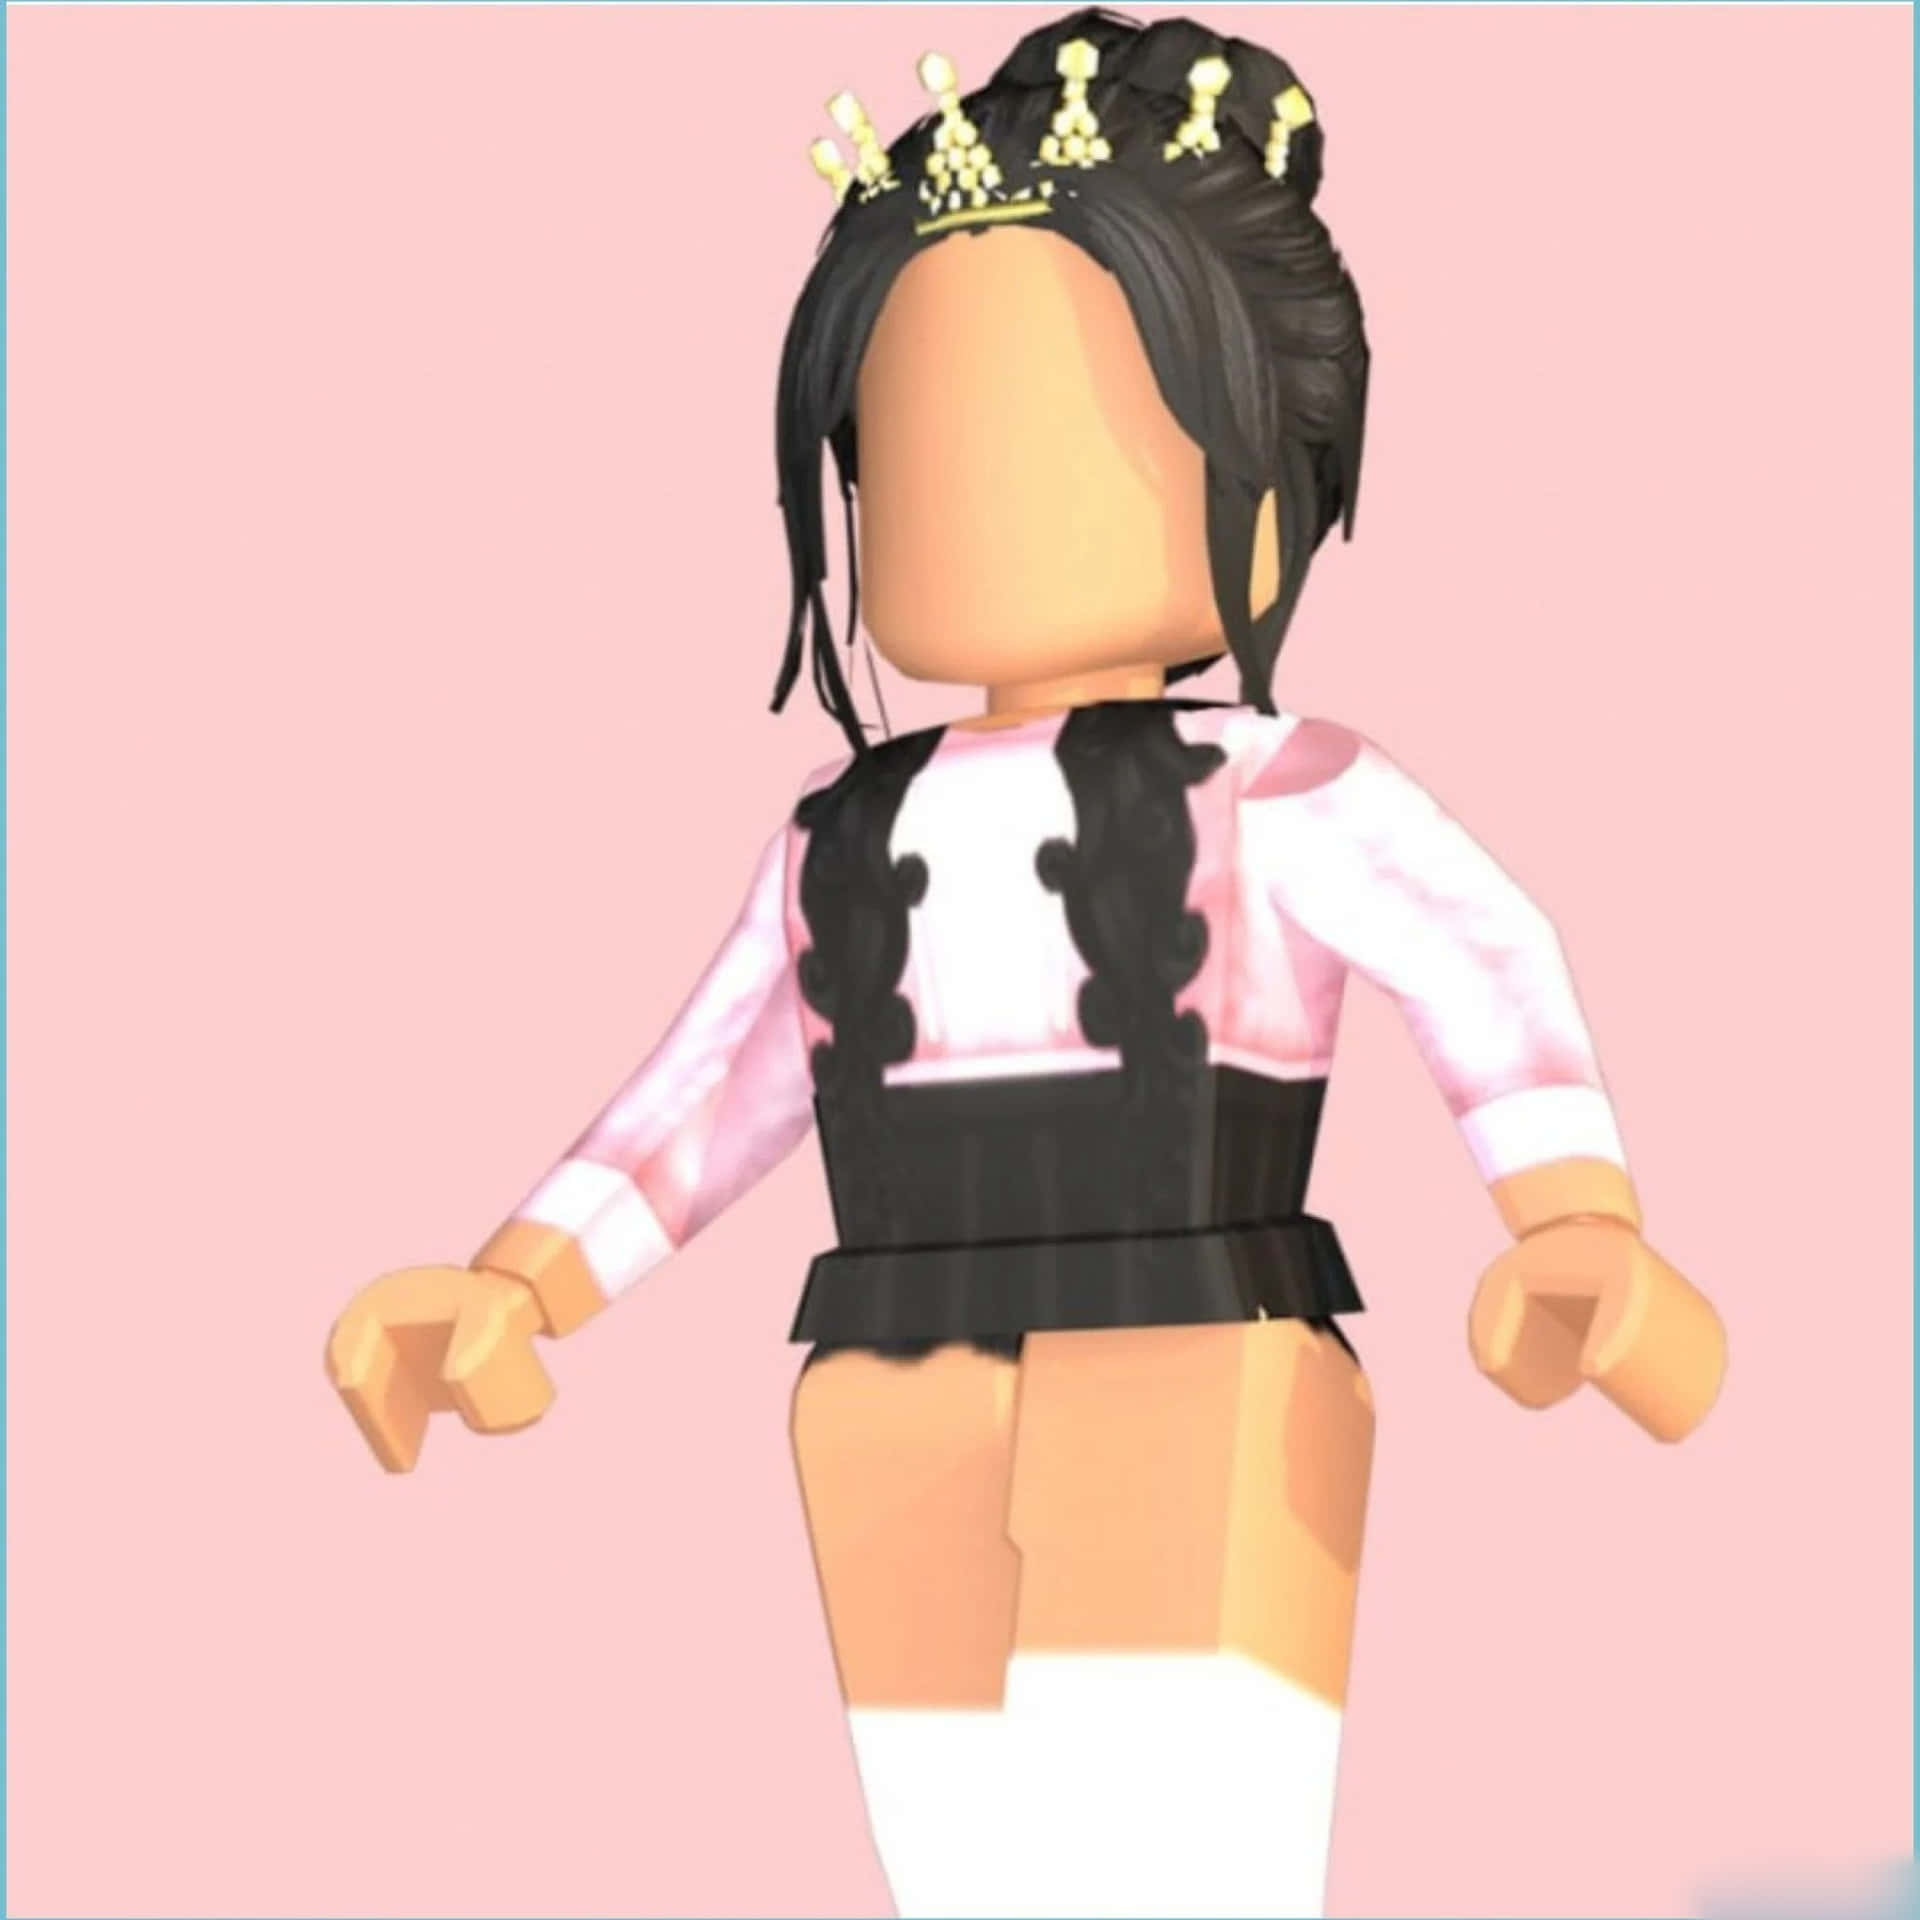 roblox avatar girl  Roblox animation, Roblox pictures, Roblox funny